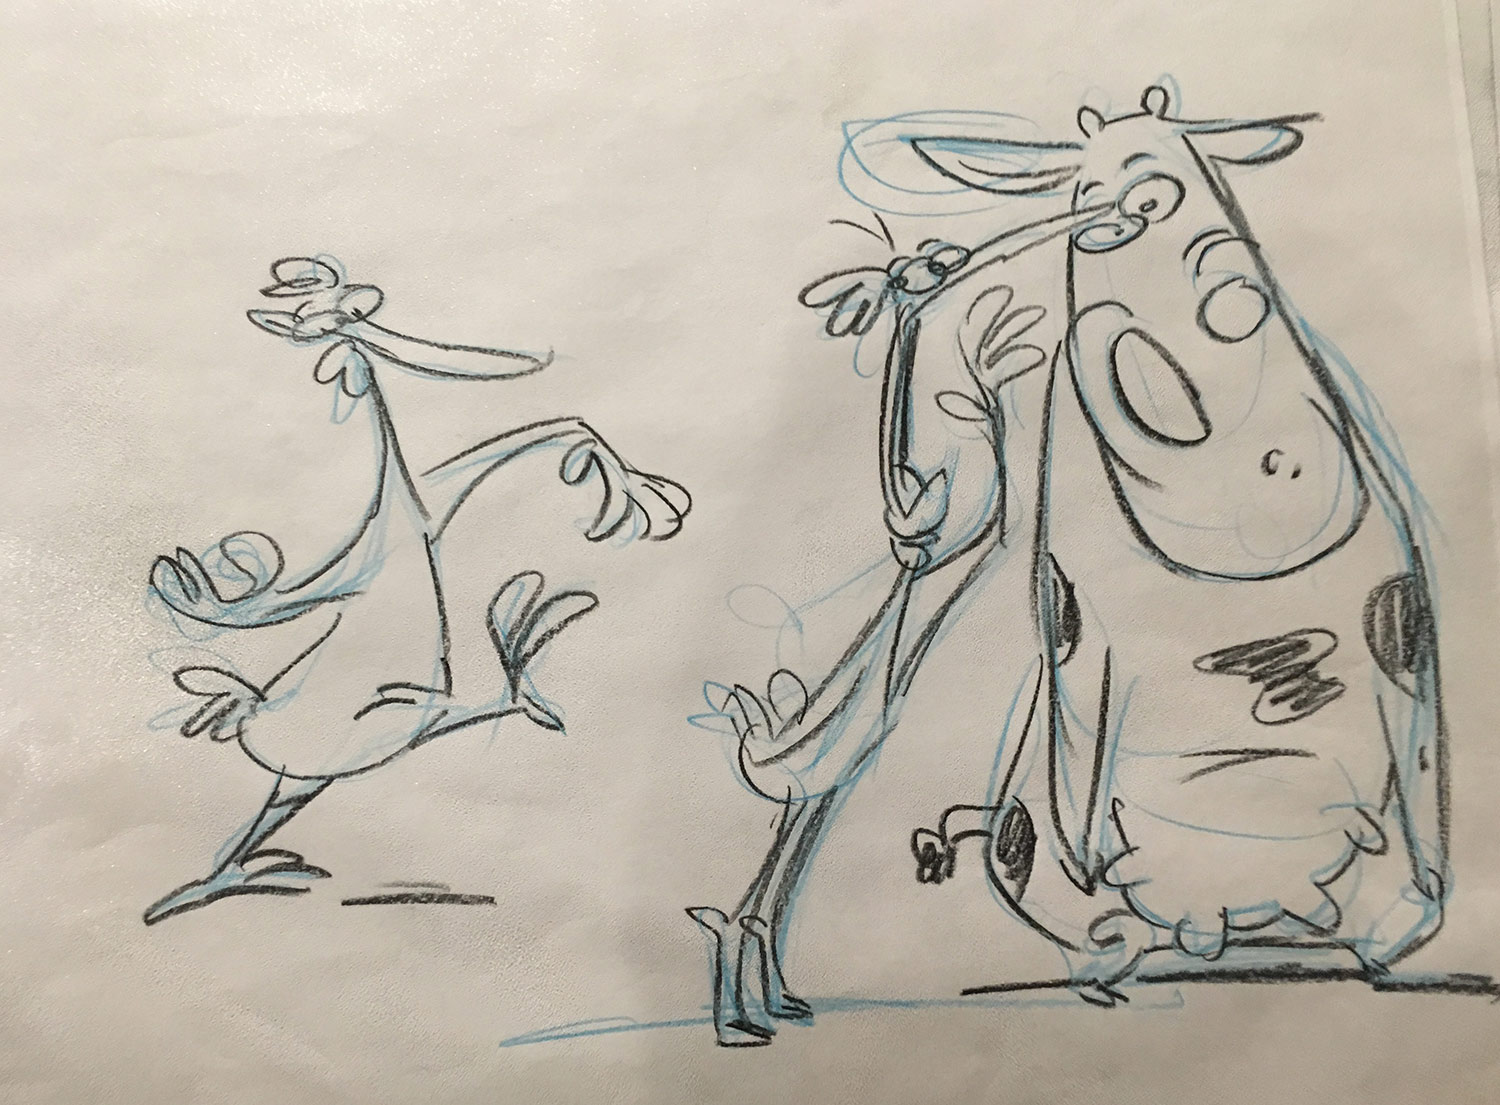 Early Cow and Chicken development sketch.